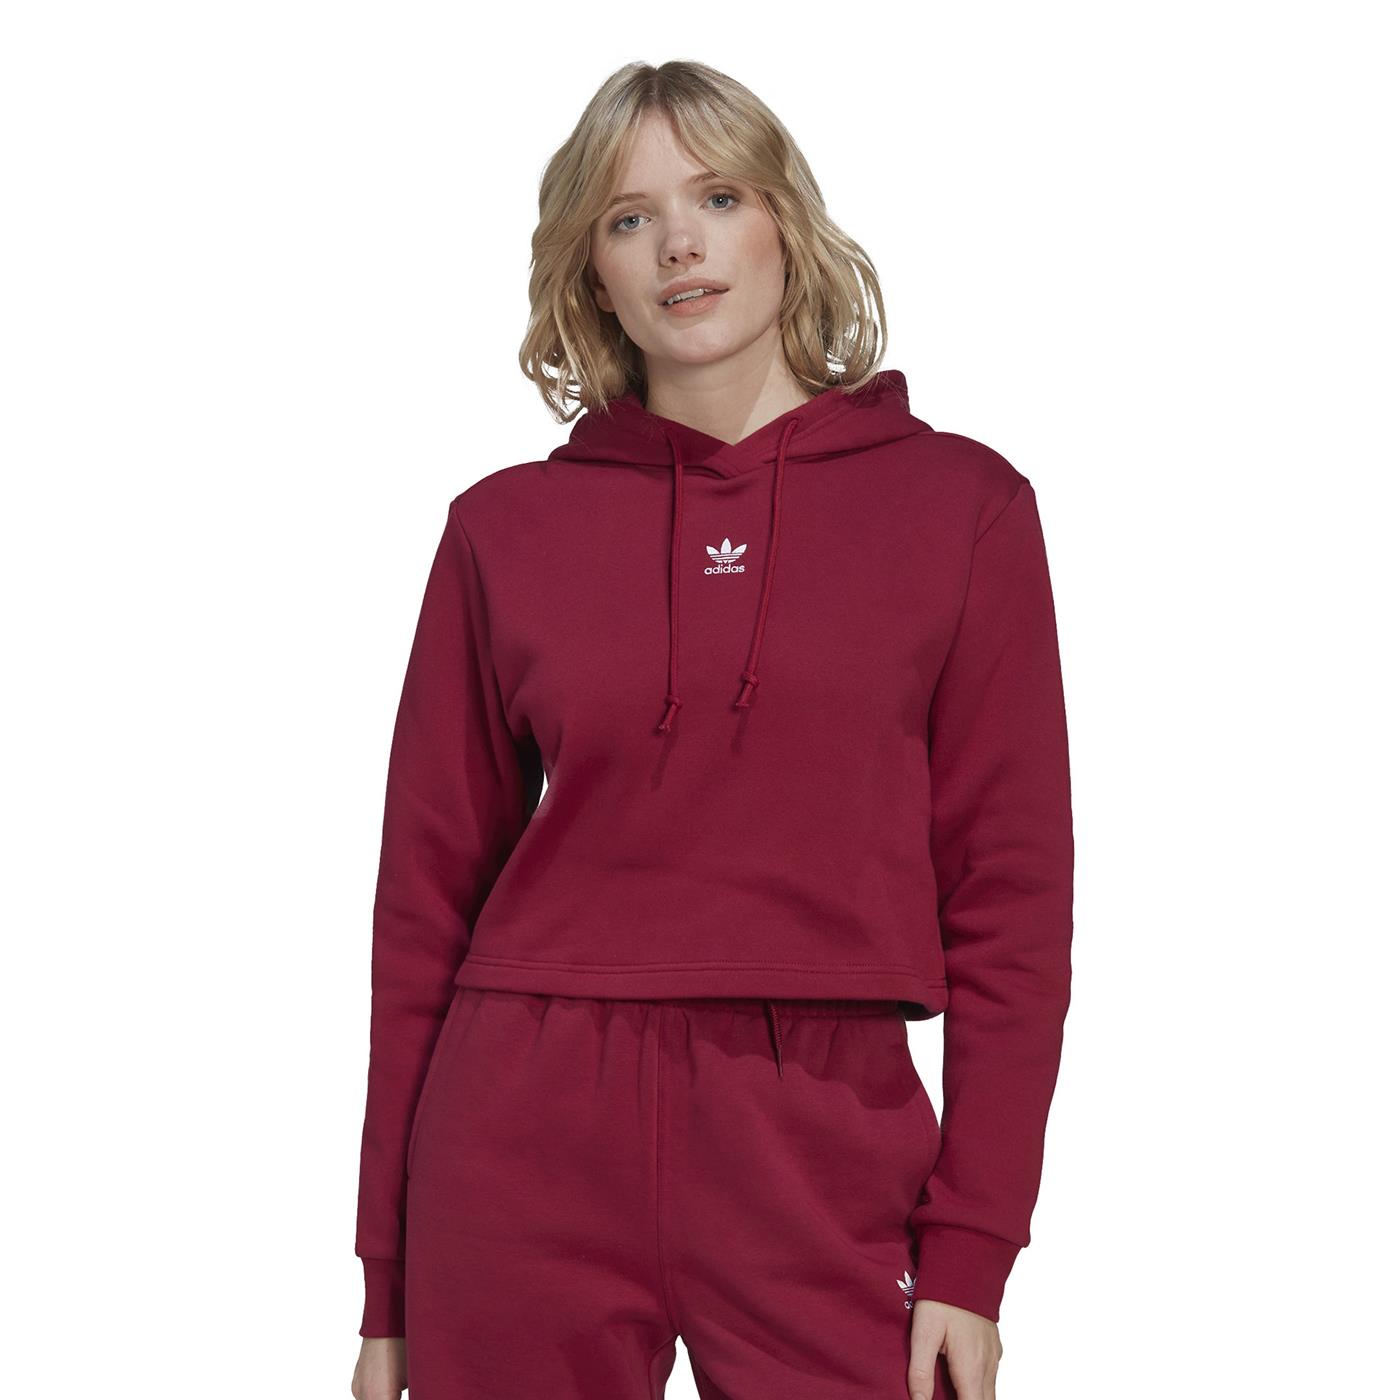 | HJ7849 | Included in the collection is the adidas | Sweatshirt ADIDAS Hoodie Bordeaux Woman